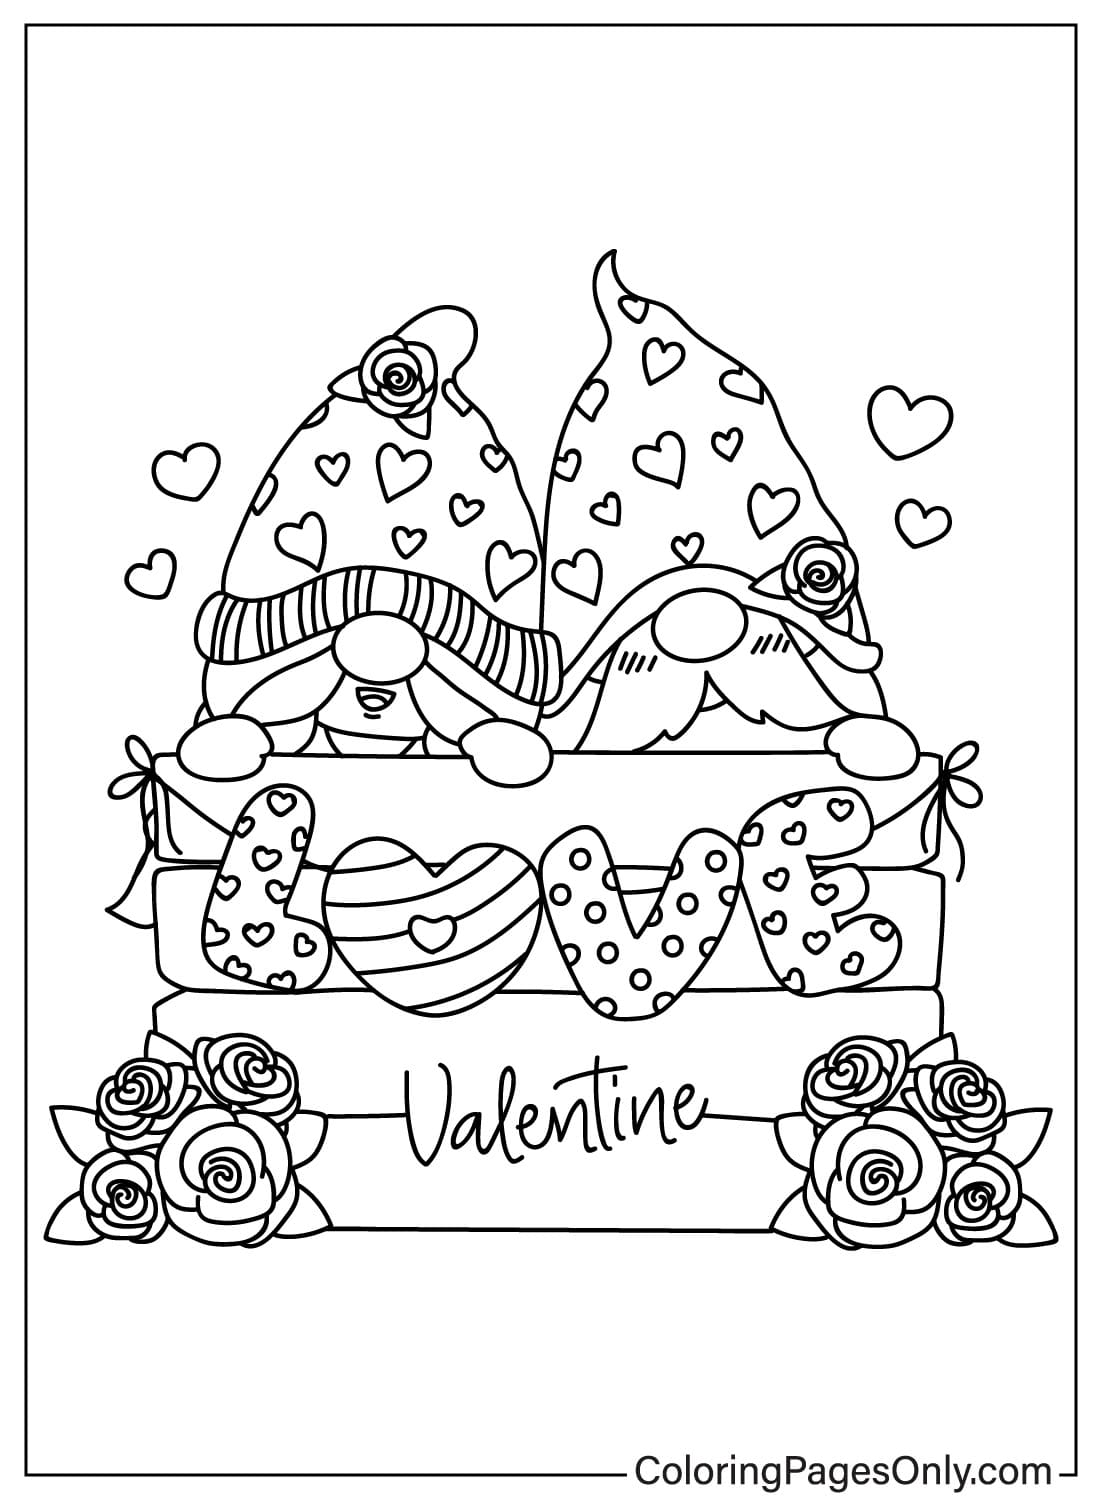 Love Coloring Page to Print